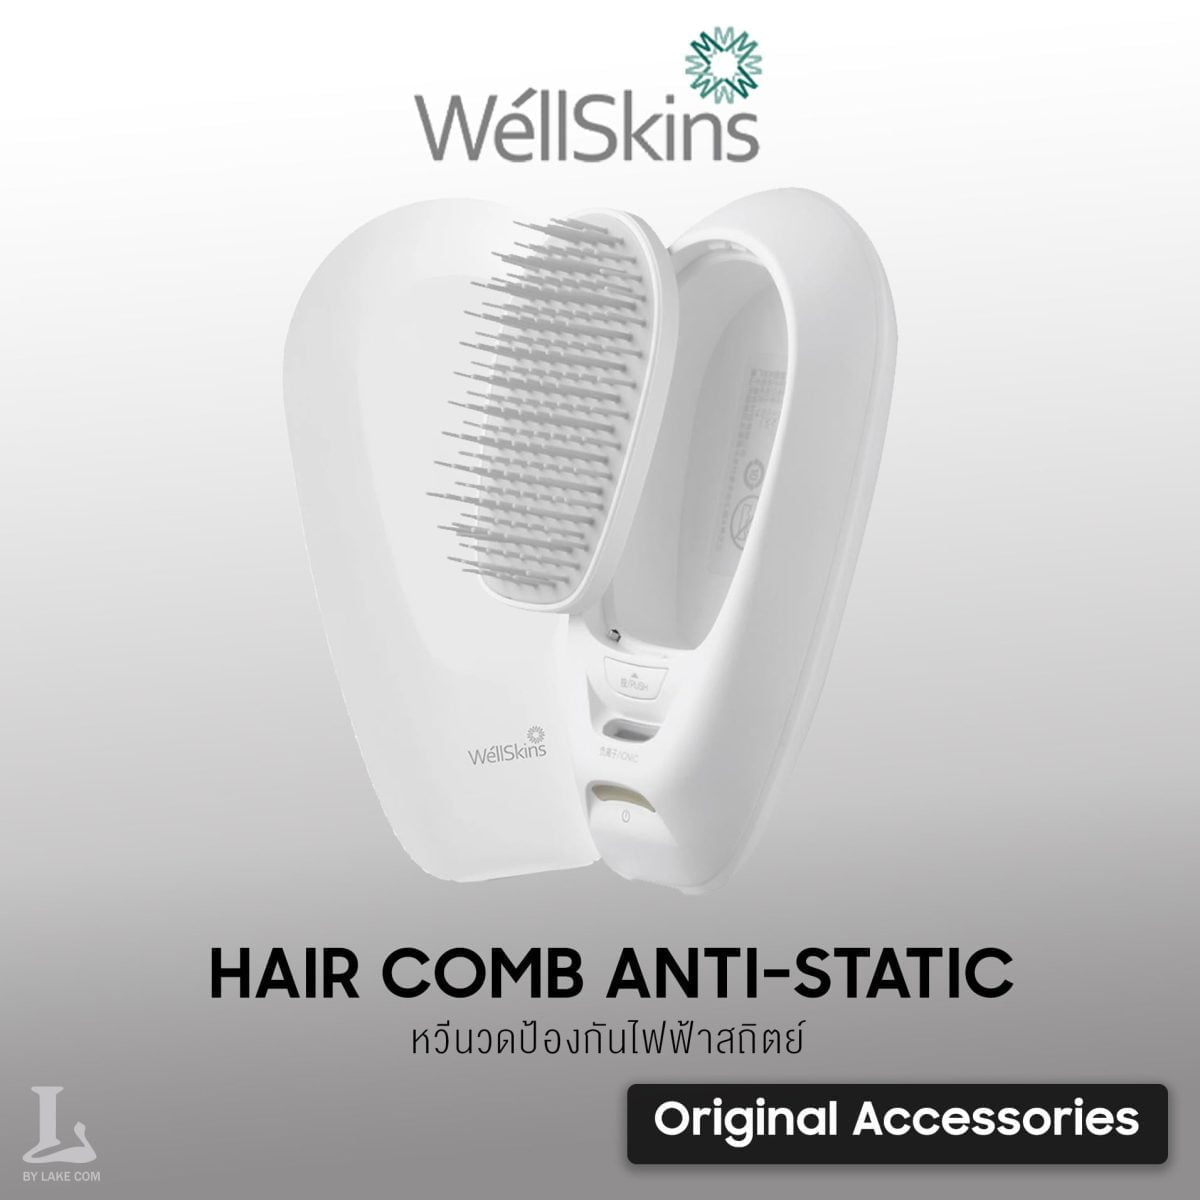 1 6 &Lt;H1&Gt;Wellskins Anion Hair Comb Anti-Static Hair Brush Massage Comb Salon Hair Styling Tool Portable Usb Rechargeable Head Spa Comb&Lt;/H1&Gt; &Lt;Ul&Gt; &Lt;Li&Gt;Deep-Ionic Generator, Active Ion Lock New Technology.&Lt;/Li&Gt; &Lt;Li&Gt;Foldable Storage Design, Easy To Separate And Easy To Carry.&Lt;/Li&Gt; &Lt;Li&Gt;Wire System Upgrade Charging Type, Long Battery Life.&Lt;/Li&Gt; &Lt;Li&Gt;Automatically Power Off After Charging/Water Intake.&Lt;/Li&Gt; &Lt;Li&Gt;Ergonomic And Comfortable Handle Feel.&Lt;/Li&Gt; &Lt;/Ul&Gt; &Lt;H3&Gt;Specification:&Lt;/H3&Gt; Brand: Wellskins Type: Wx-Fz200 Color: White Rated Voltage: Dc3.7V Rated Current: 1A Rated Power: 0.3W Weight &Amp; Size: Product Weight: 0.27Kg Package Weight: 0.38Kg Product Size(L X W X H): 6.45 X 2.8 X 12.58Cm Package Size(L X W X H): 7.5 X 4.2 X 14.2Cm &Lt;H3&Gt;Package Contents:&Lt;/H3&Gt; 1 X Ion Comb 1 X Usb 1 X Bag 1 X User Manual Wellskins Anion Hair Comb Anti-Static